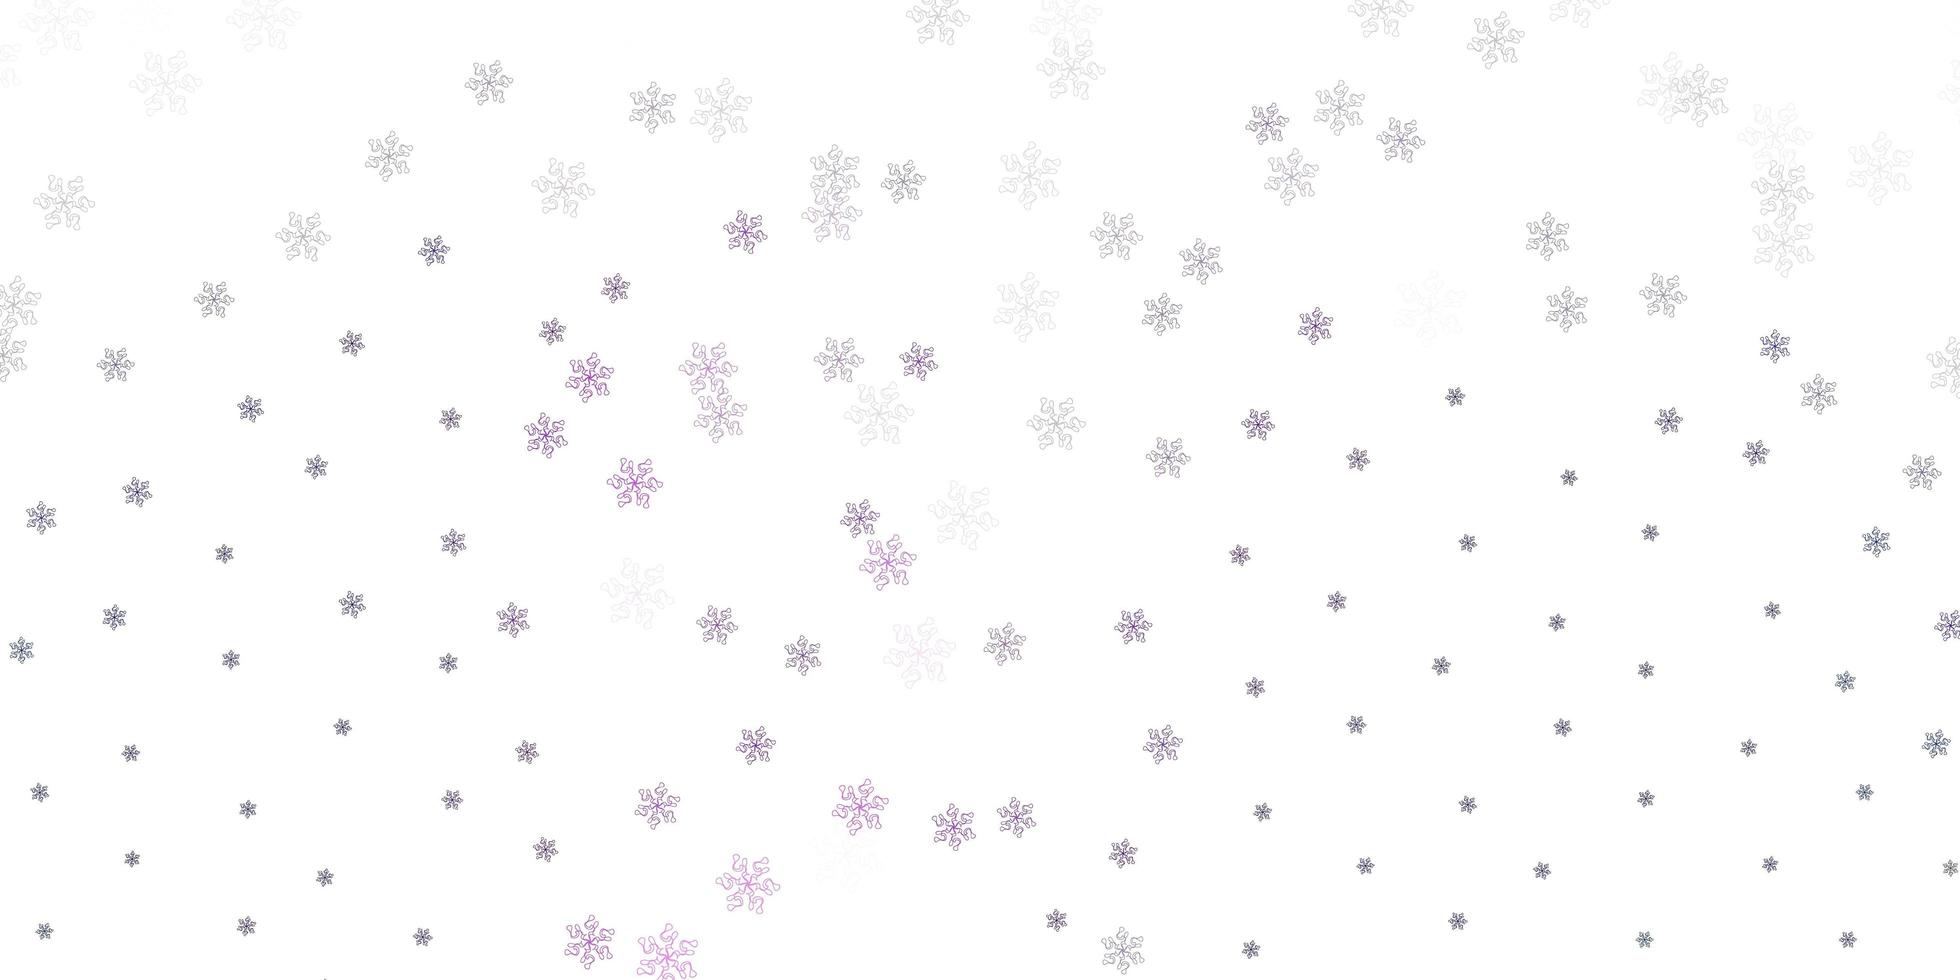 Light purple vector doodle background with flowers.